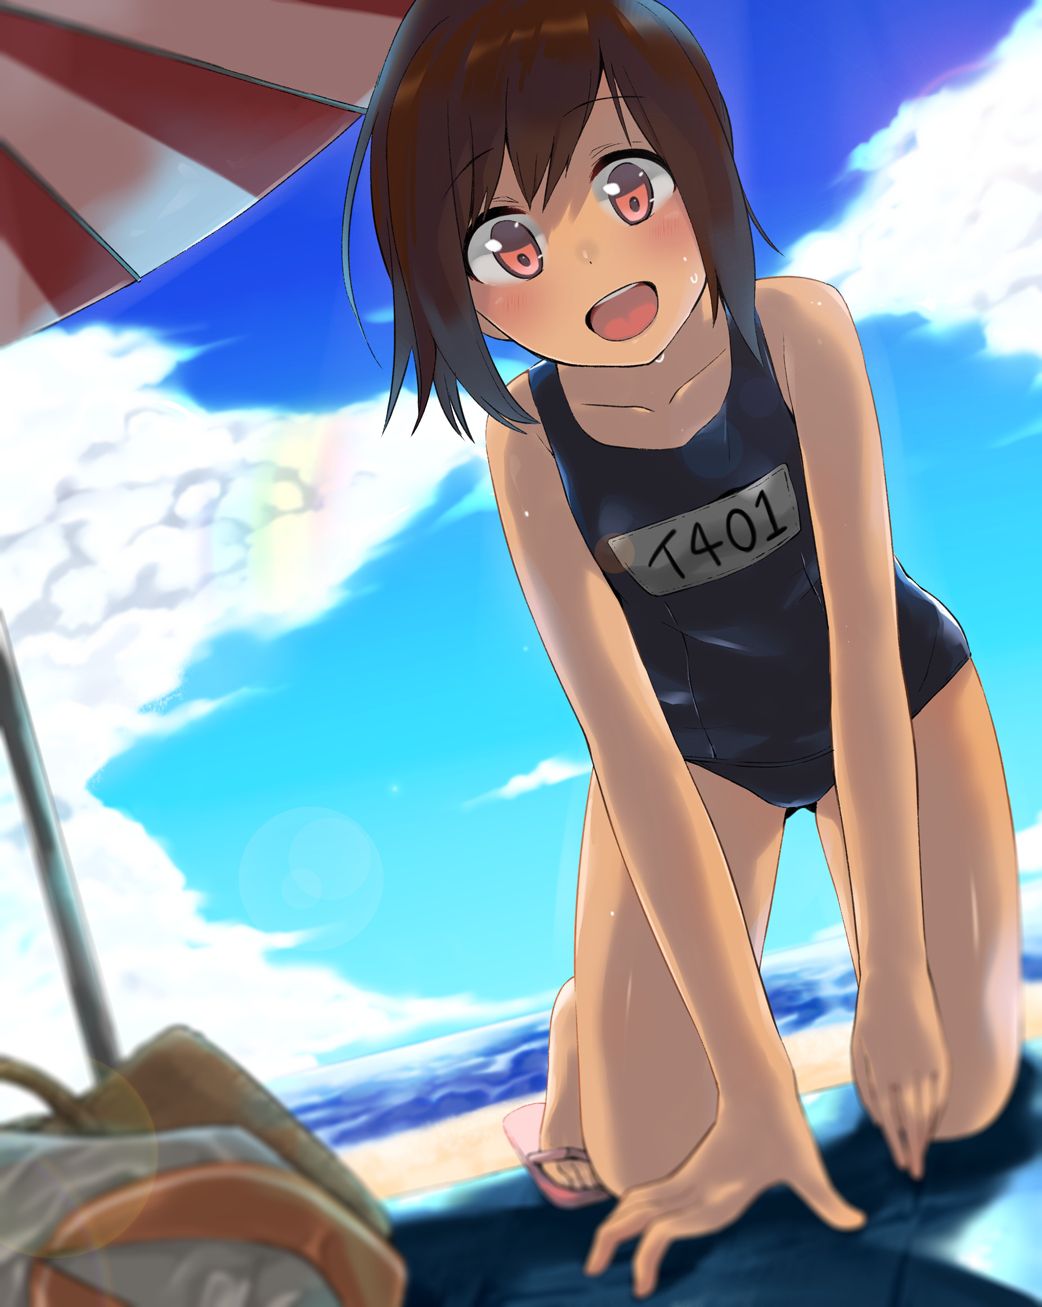 LO I-401 [secondary-ZIP: swim-CHAN's "fleet abcdcollectionsabcdviewing" cute pictures together 46